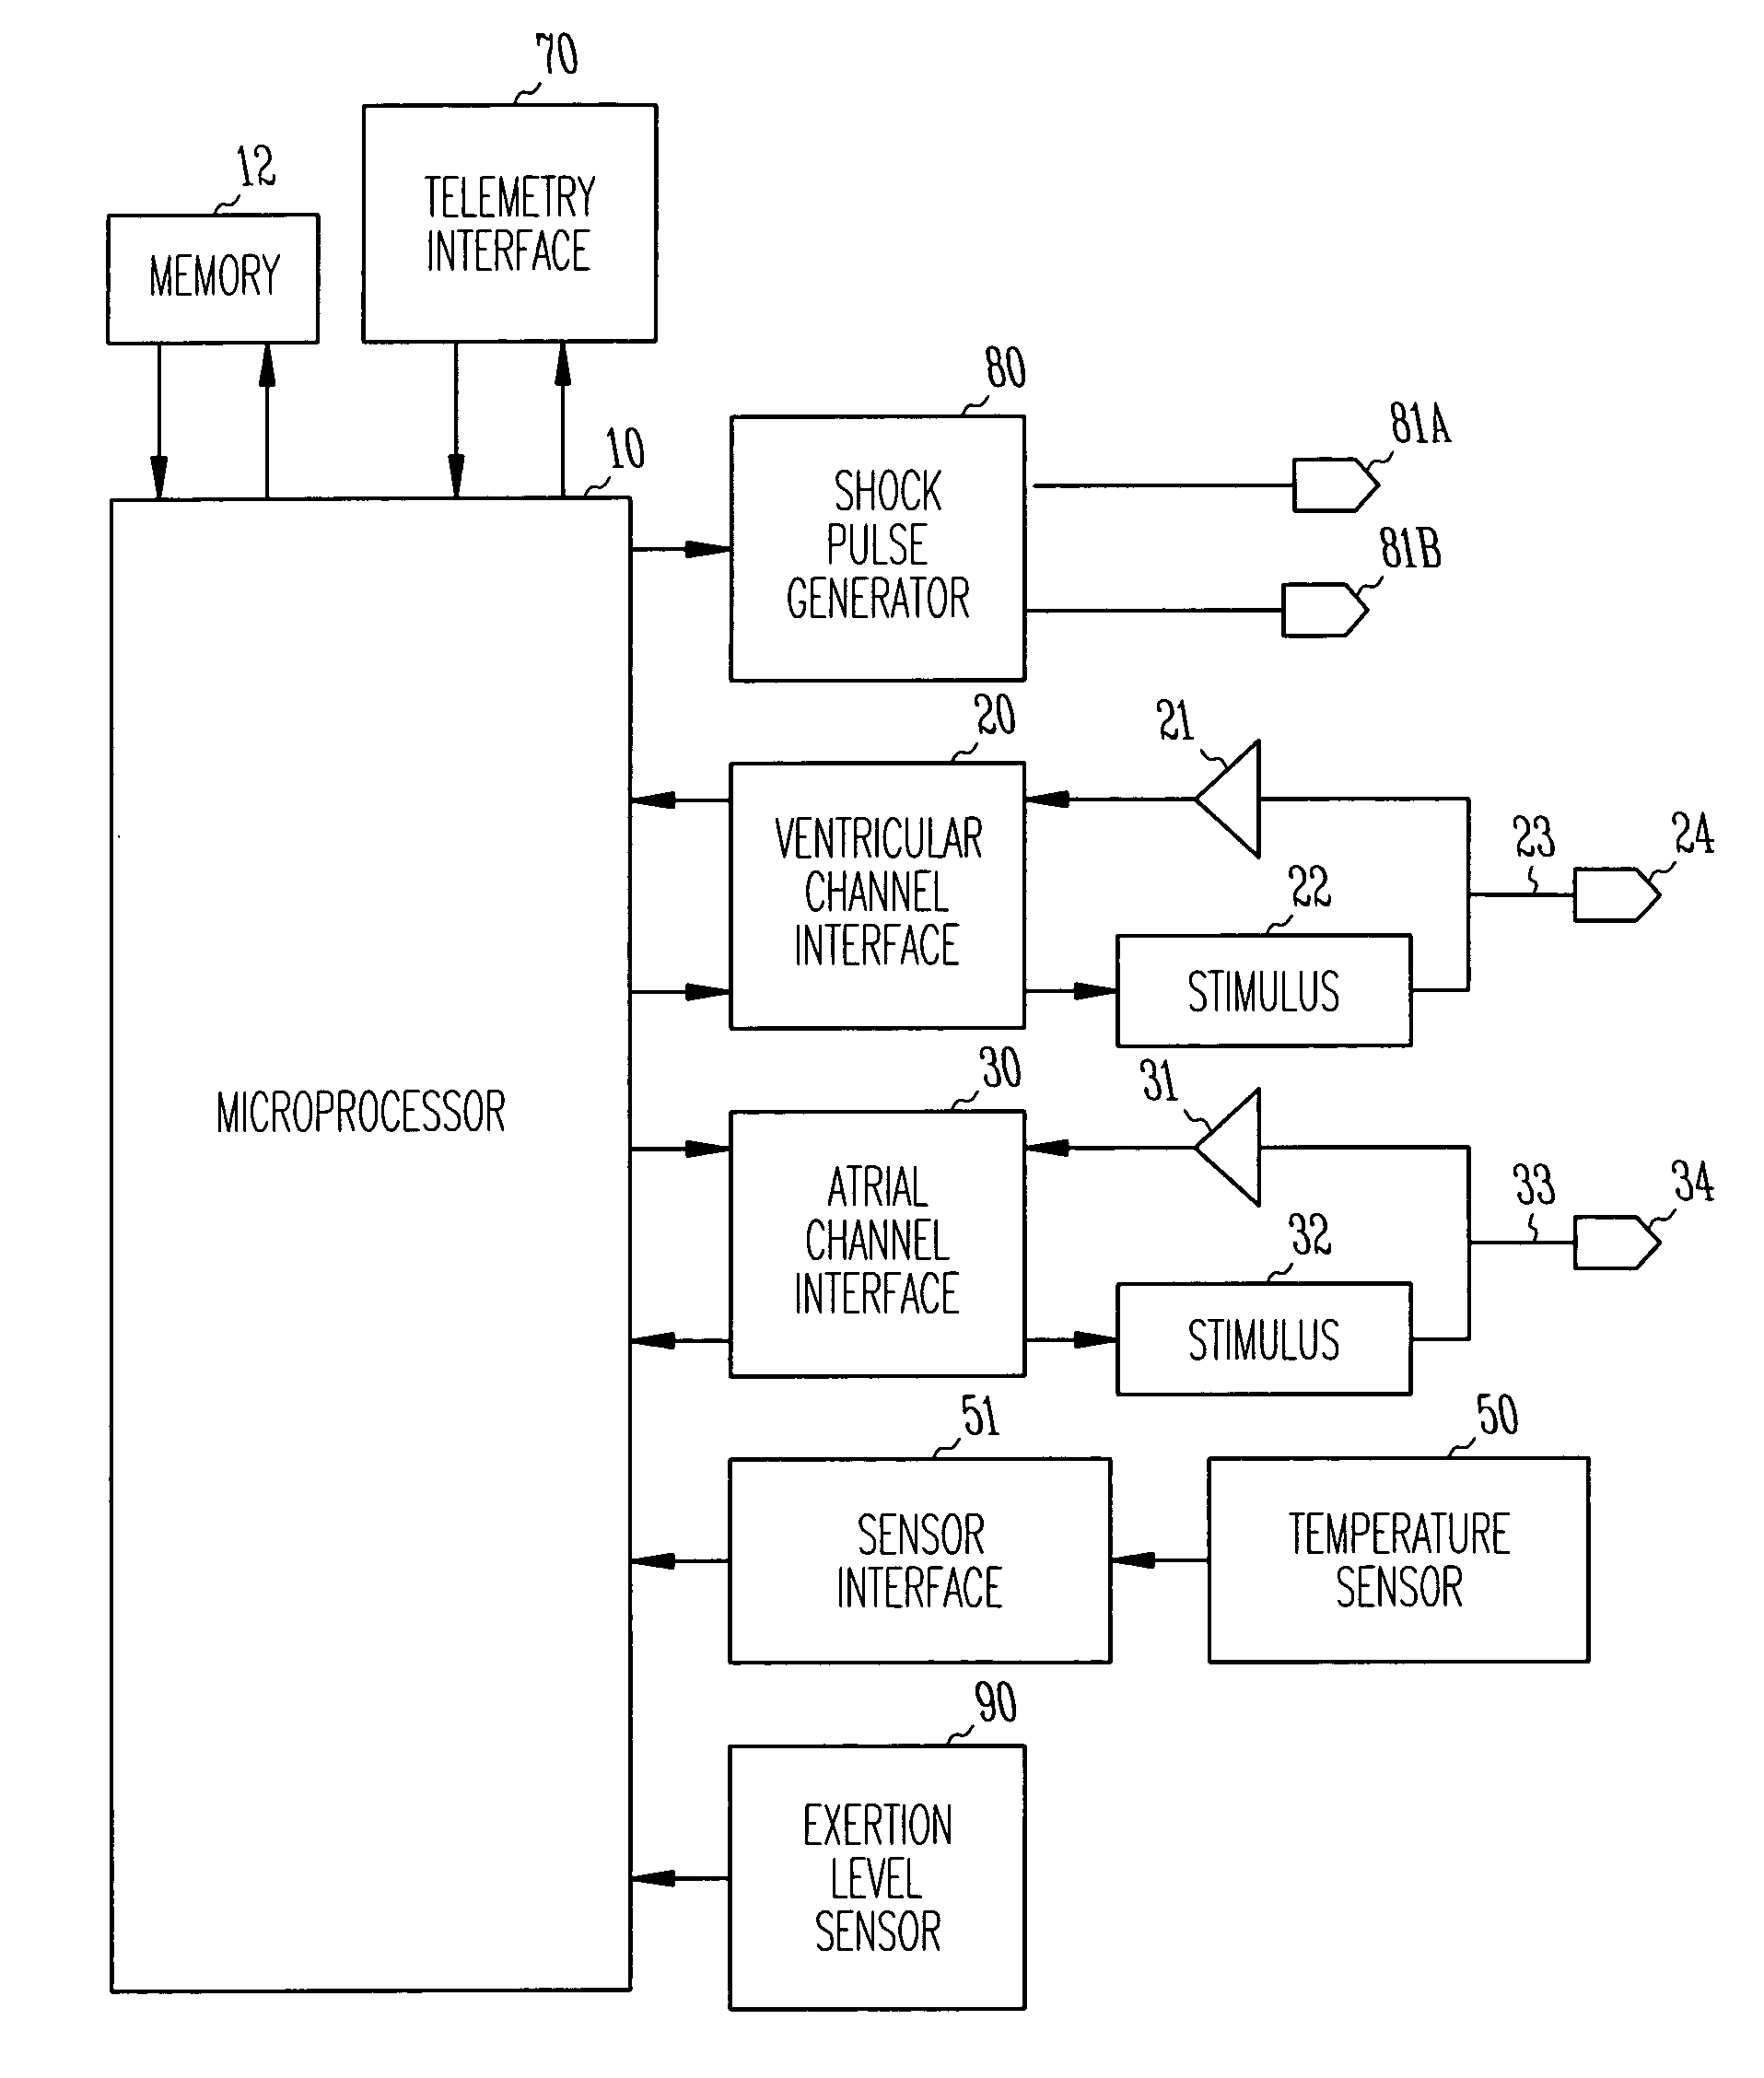 Implantable medical device with temperature measuring and storing capability